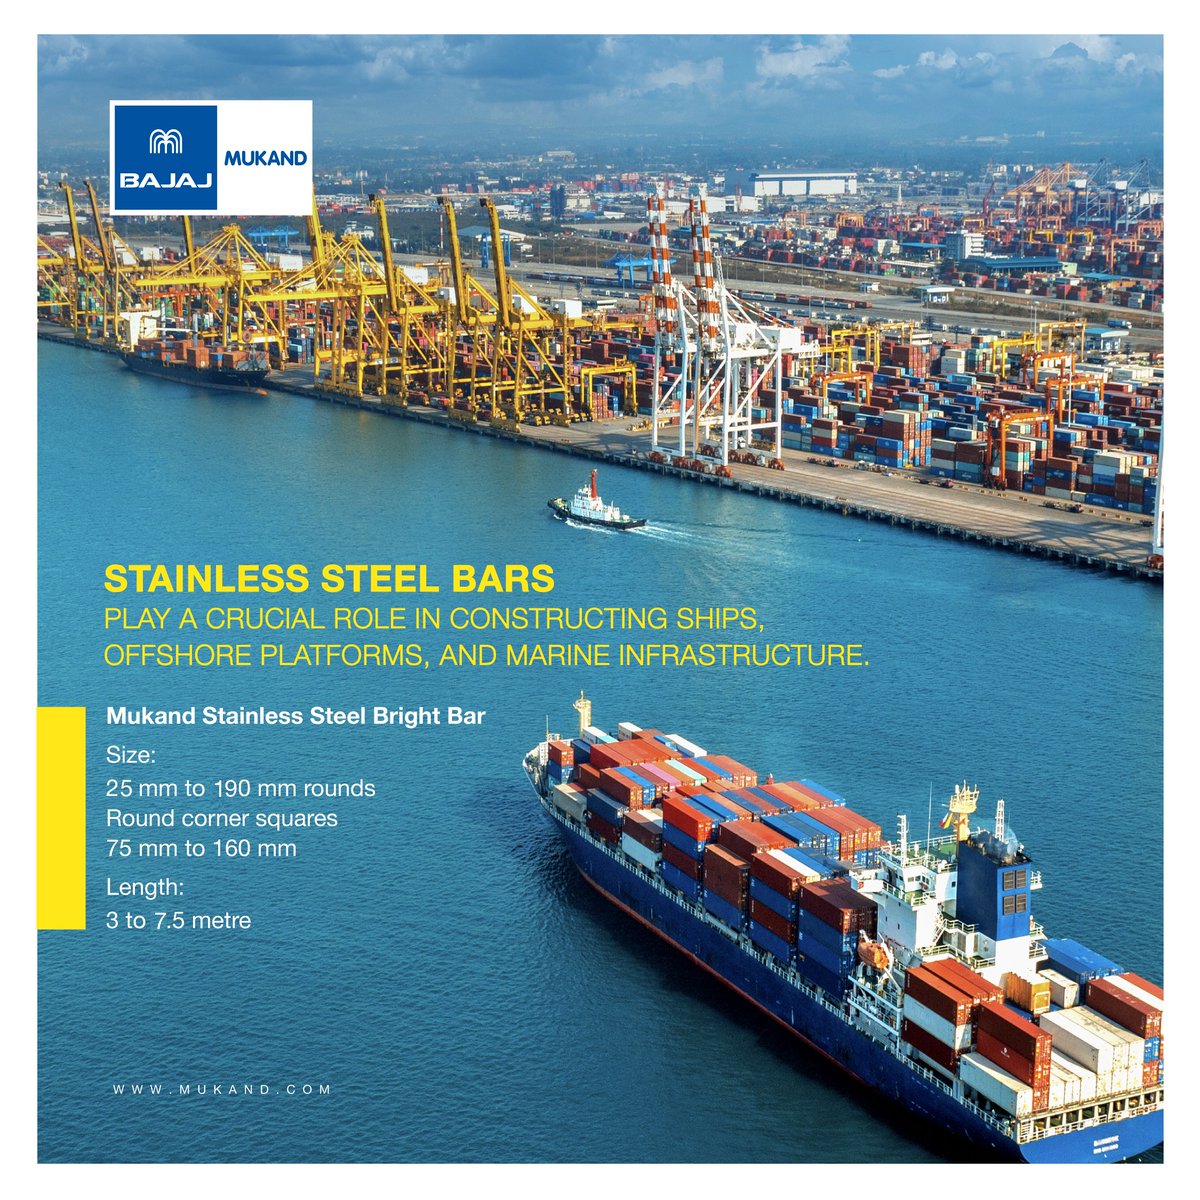 In the challenging conditions of the open sea, stainless steel shines as the ideal material for #shipbuilding. 

#StainlessSteel #BrightBars #Shipbuilding #MarineIndustry #Durability #MukandLimited #Engineering #Innovation #Quality #Performance #Bajaj #Manufacturing